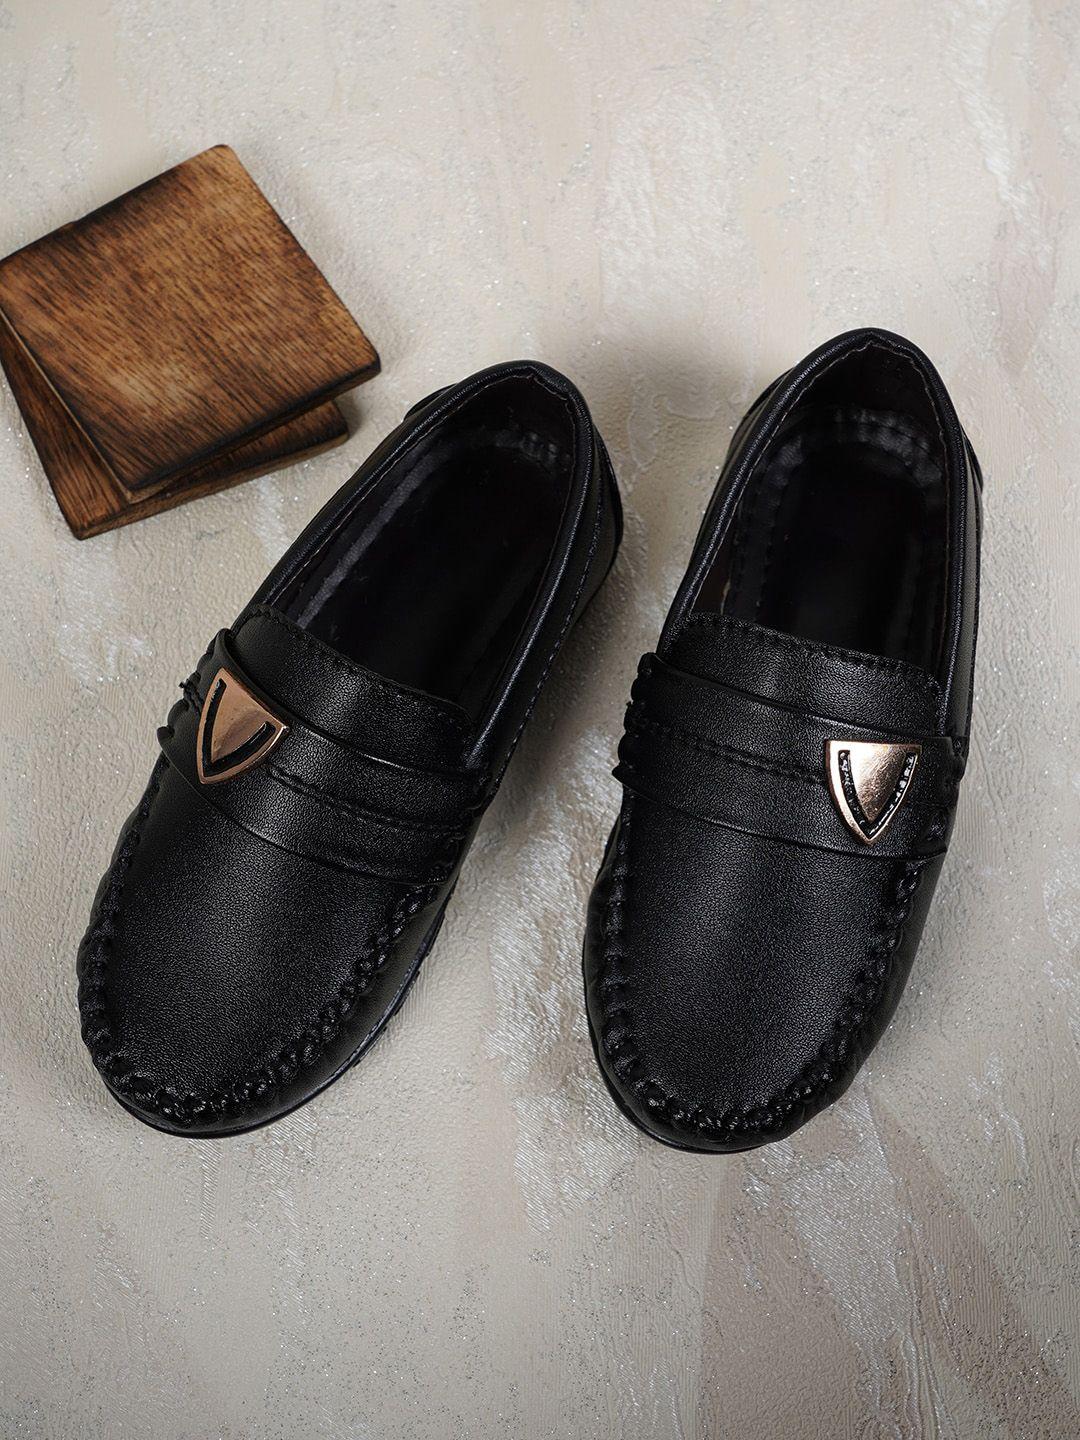 style shoes boys textured round toe loafers